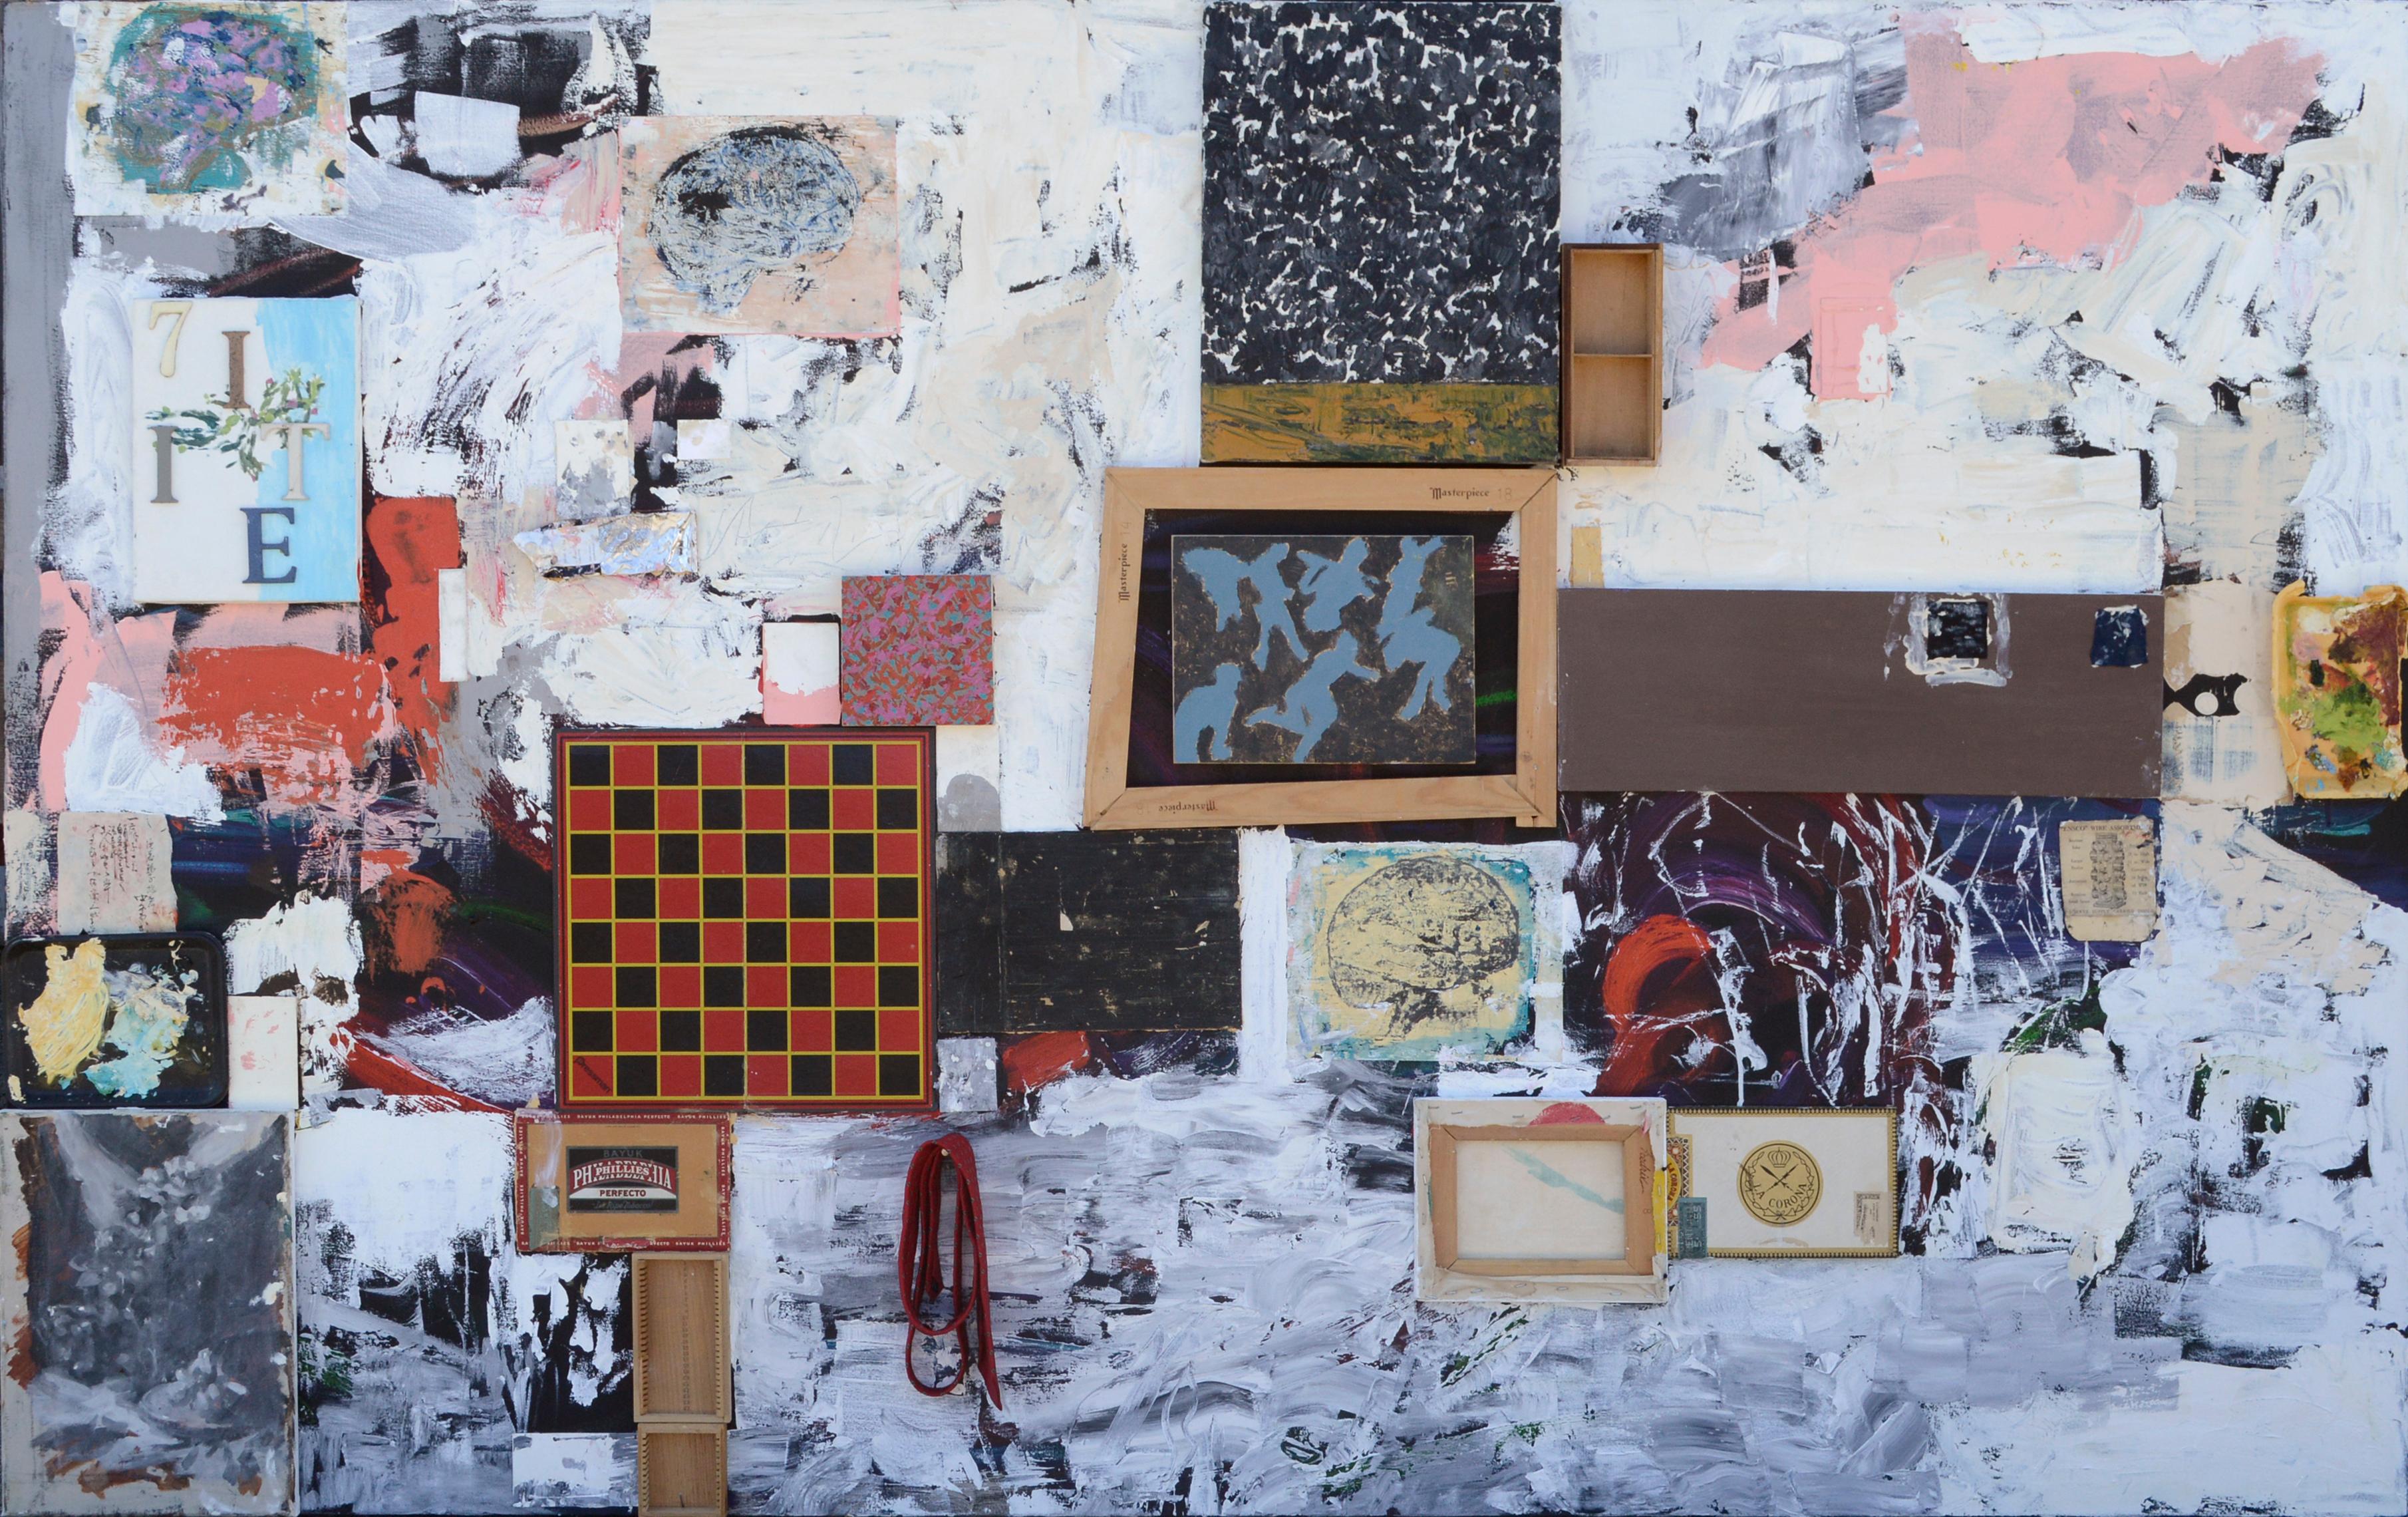 Assemblage with Checkerboard on Canvas - Mixed Media Art by Michael Pauker 